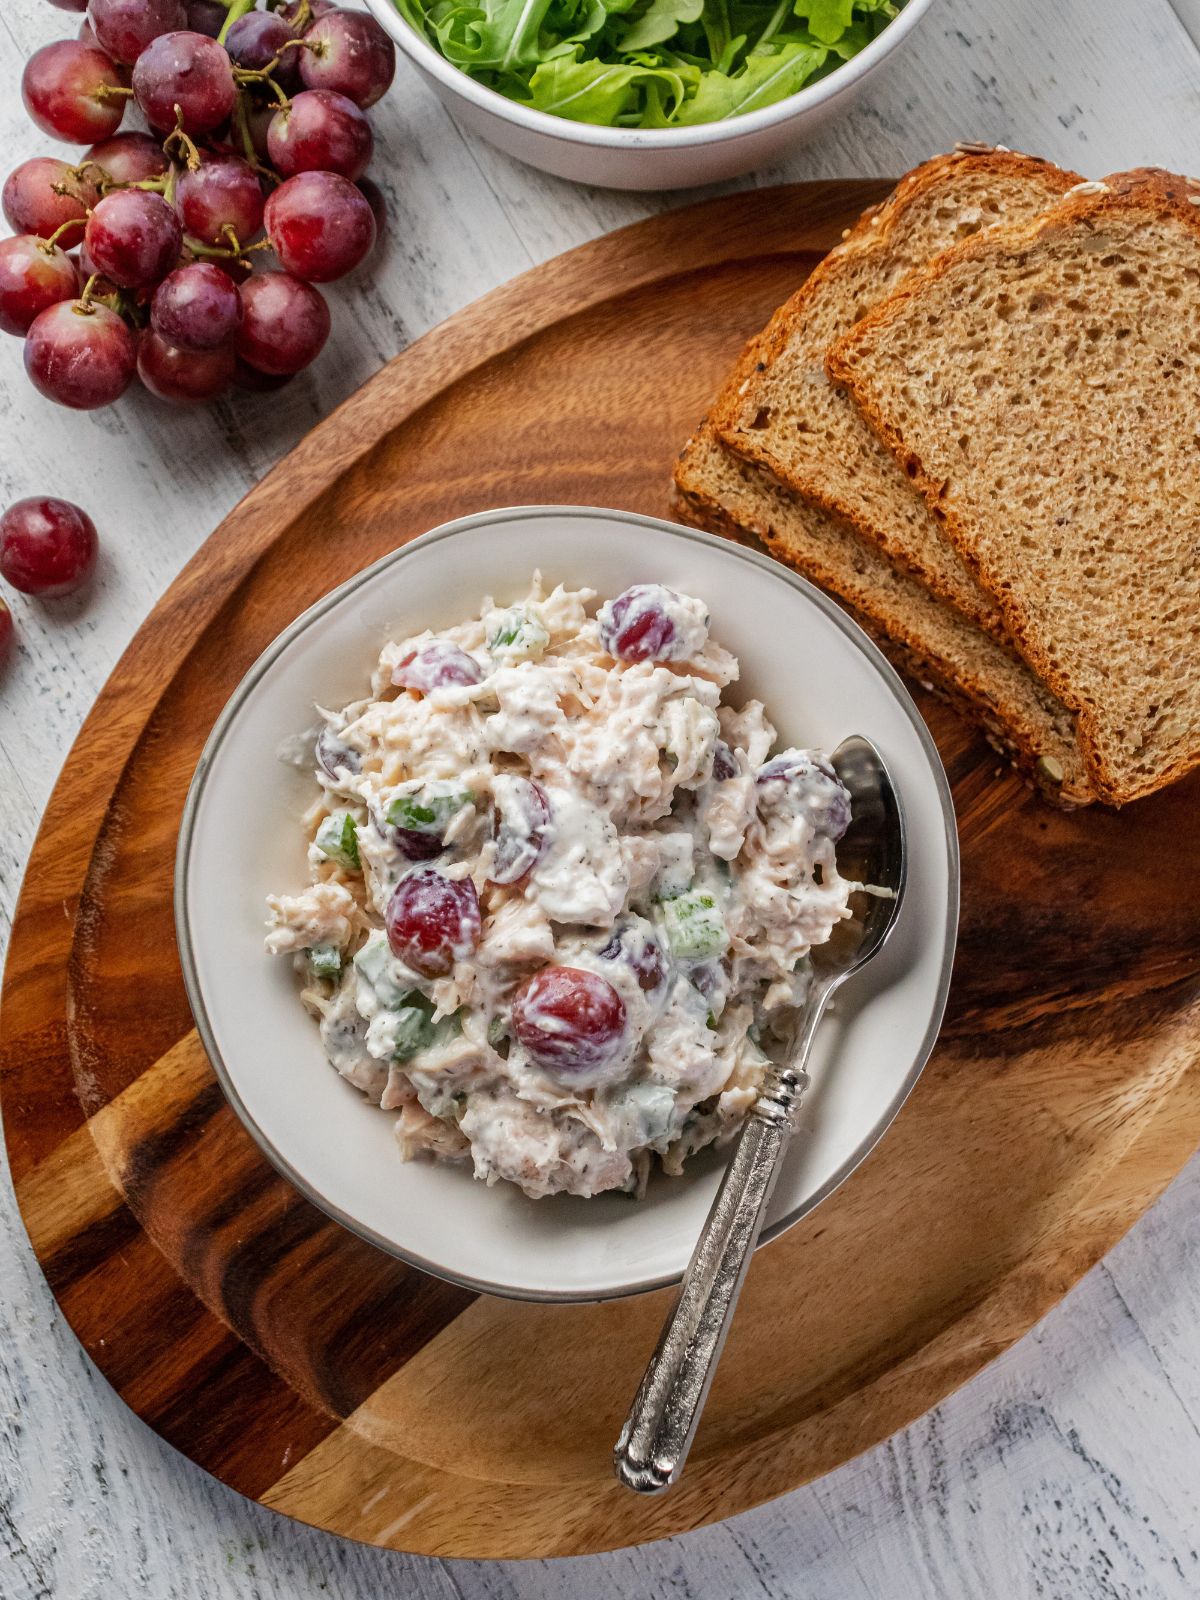 A bowl of high protein chicken salad on a wooden platter with slices of bread to the side and a bunch of grapes.